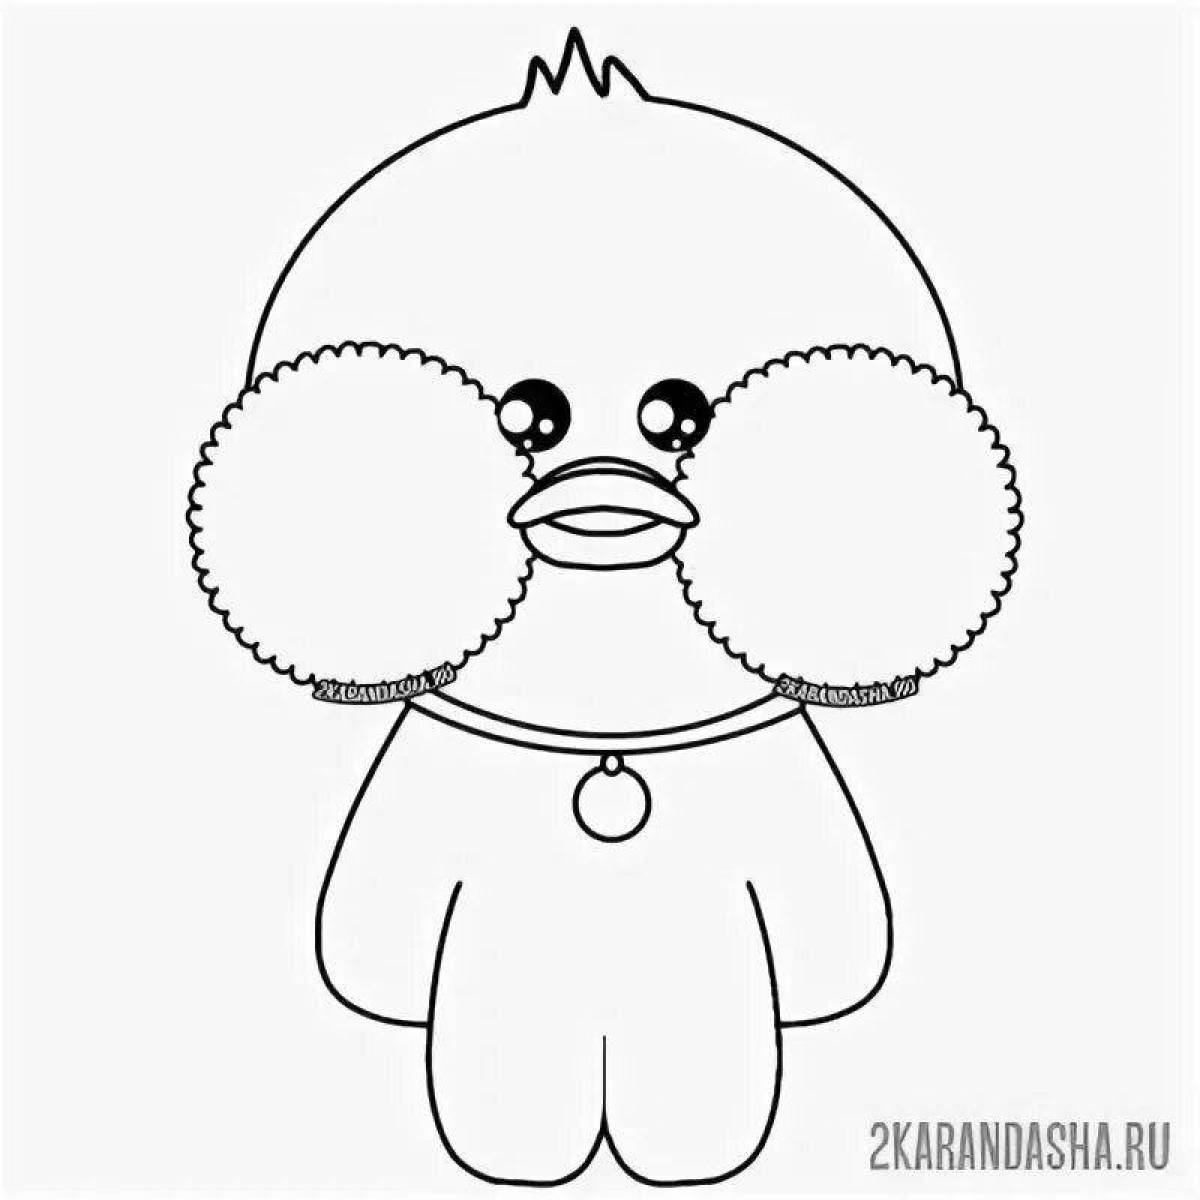 Crazy fanfan duck coloring page